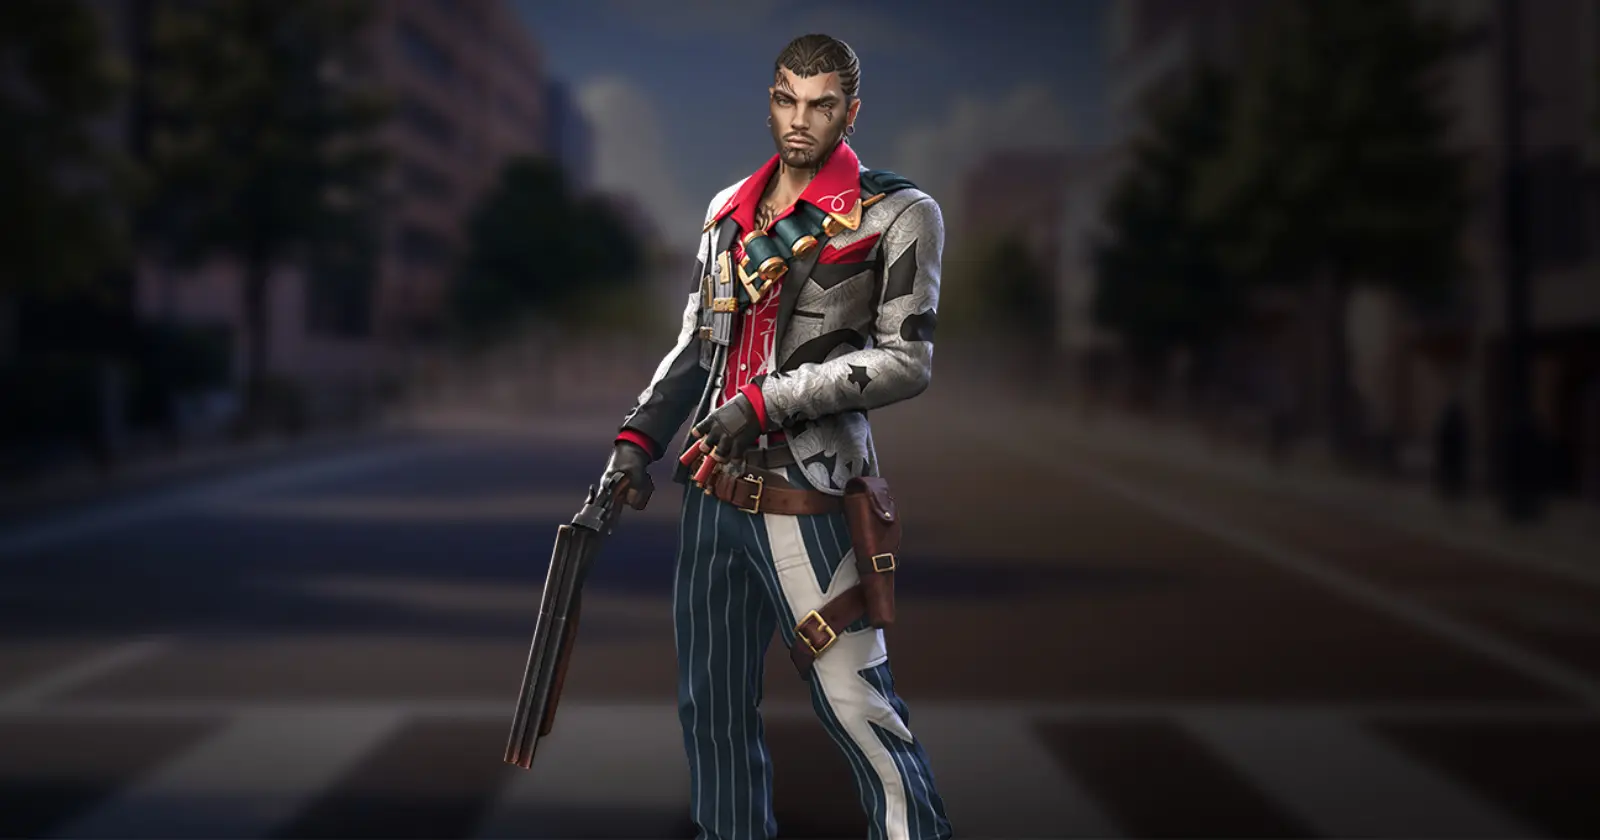 Antonio character stands in the middle of an empty street. They hold a weapon in their right hand and wear a detailed, colorful outfit